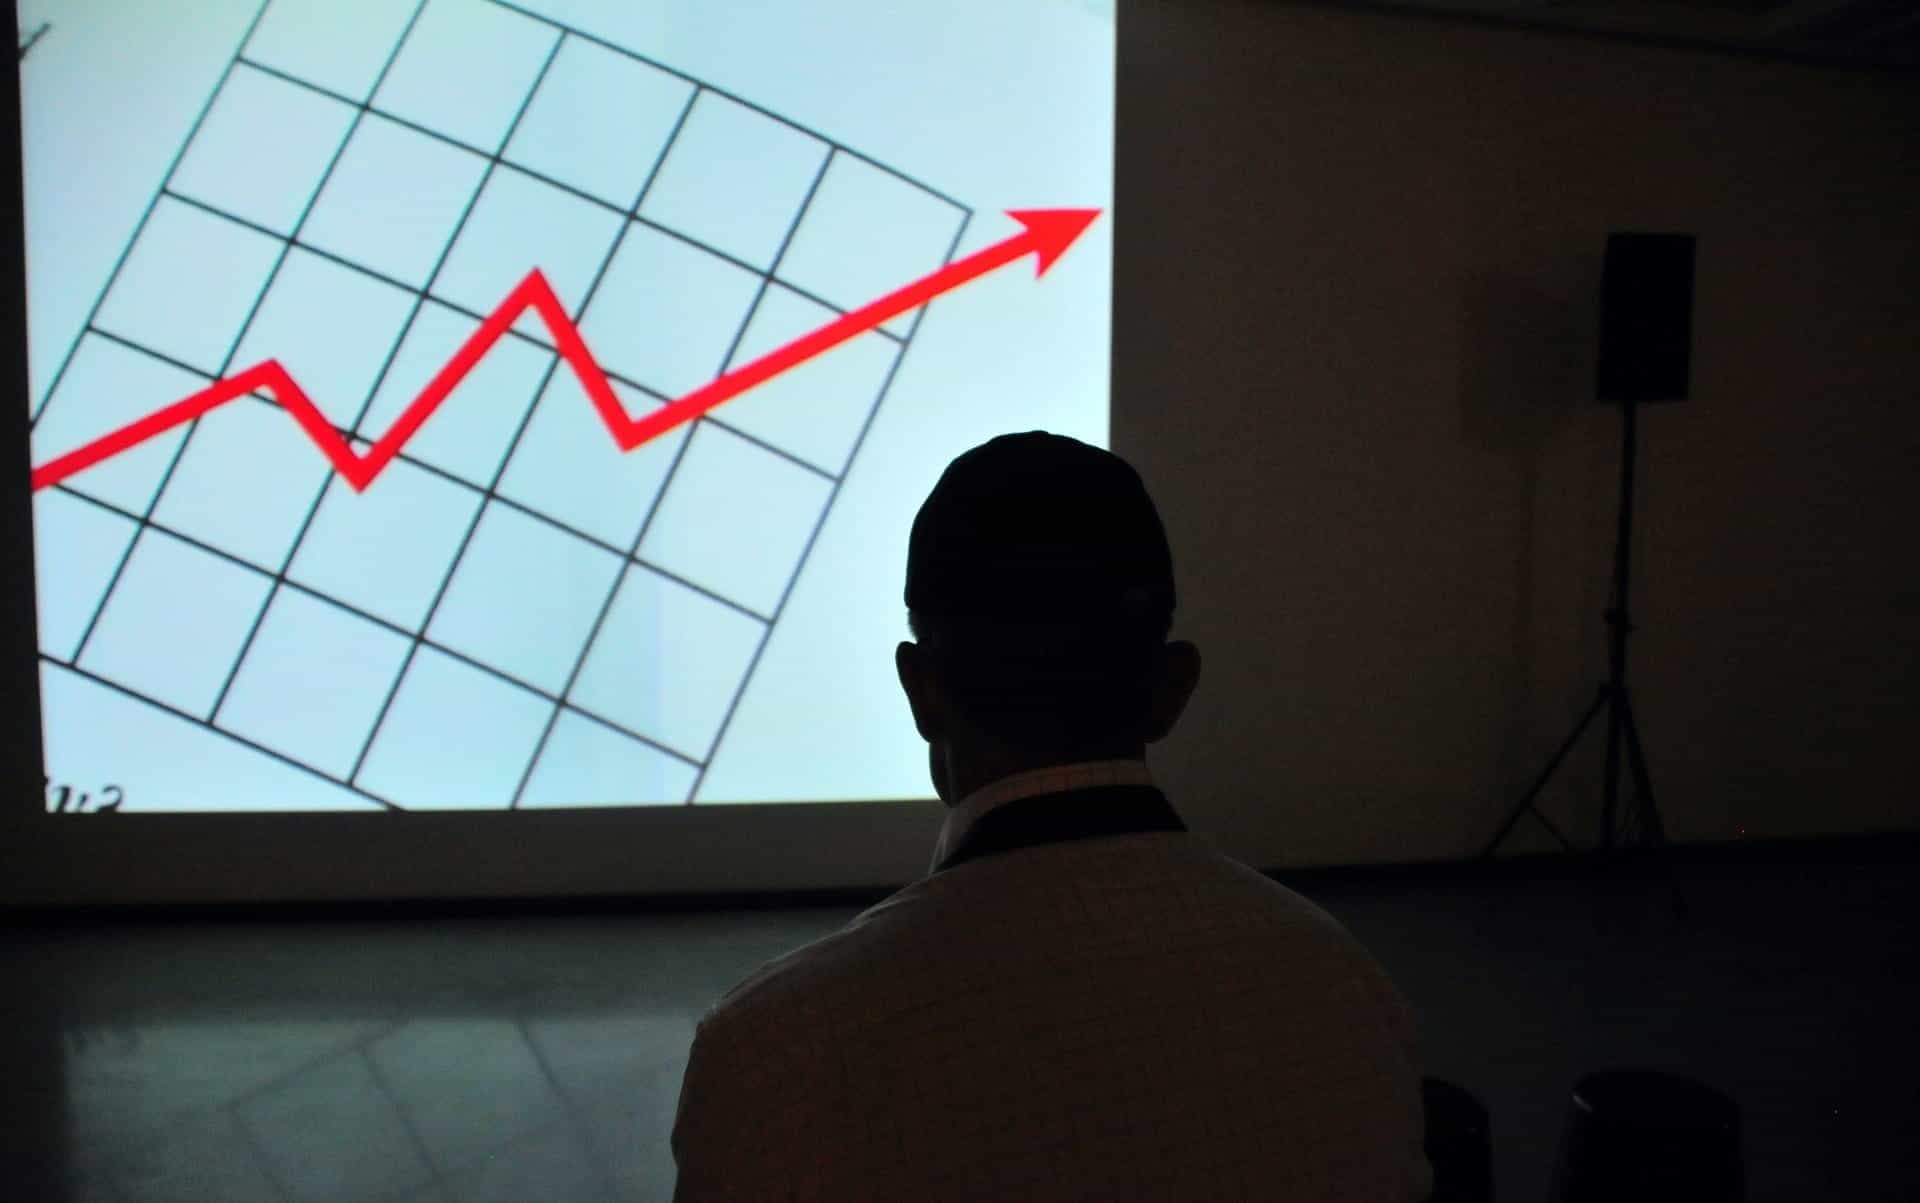 A man looks at a chart which shows a red arrow trending upward.